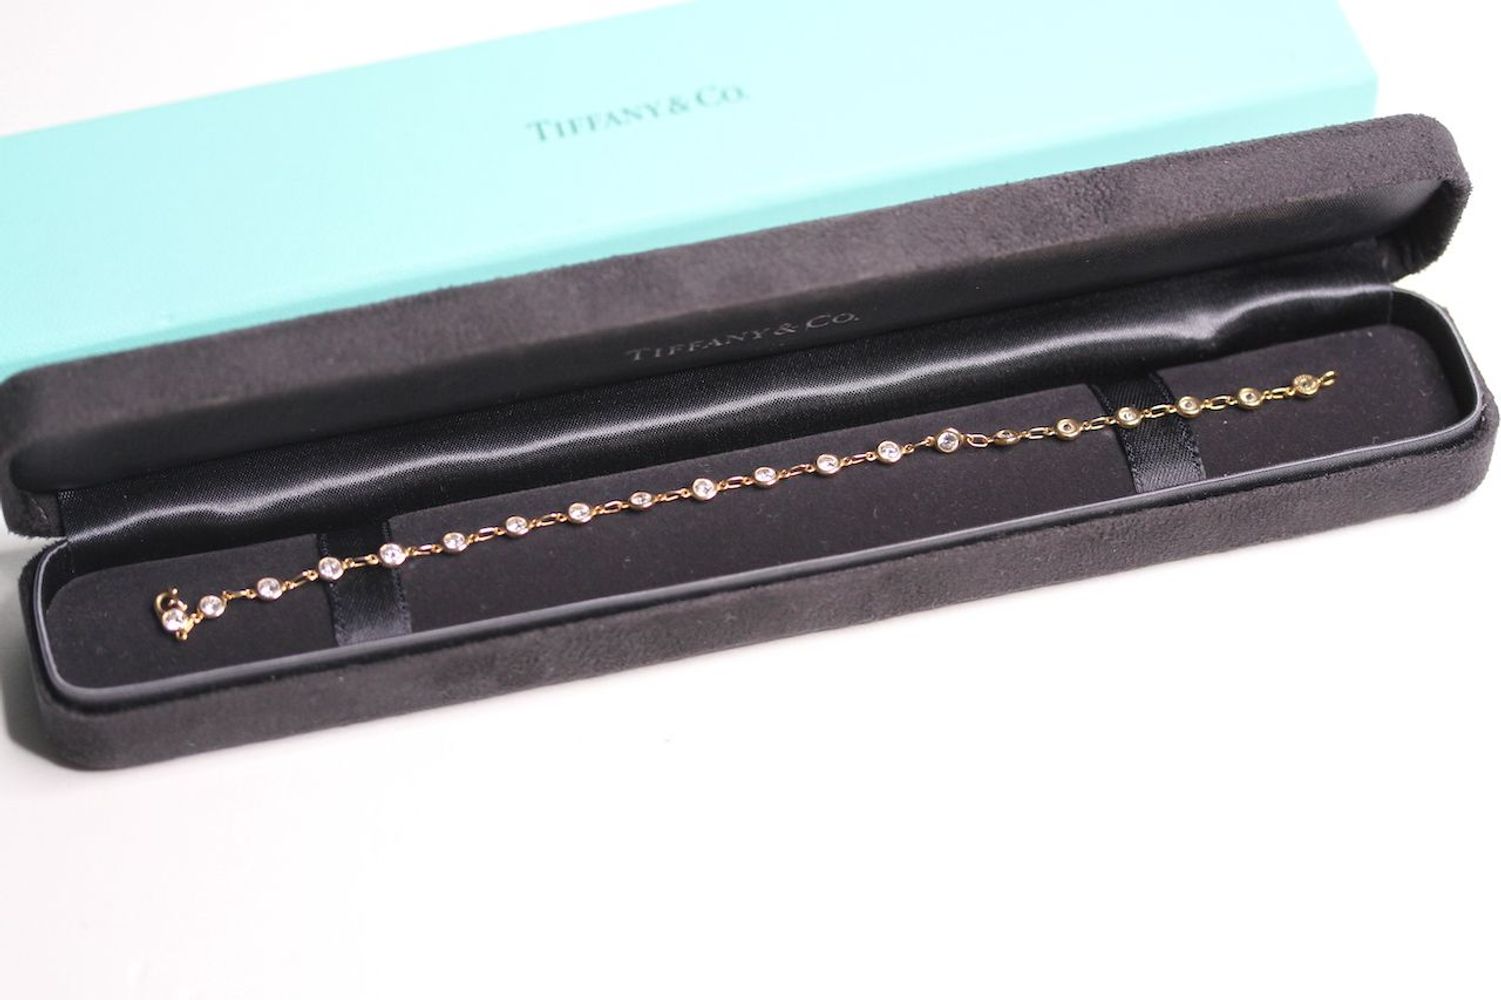 18CT TIFFANY & CO ELSA PERETTI DIAMOND BRACELET WITH BOX AND POUCH, 18ct rose gold bracelet with